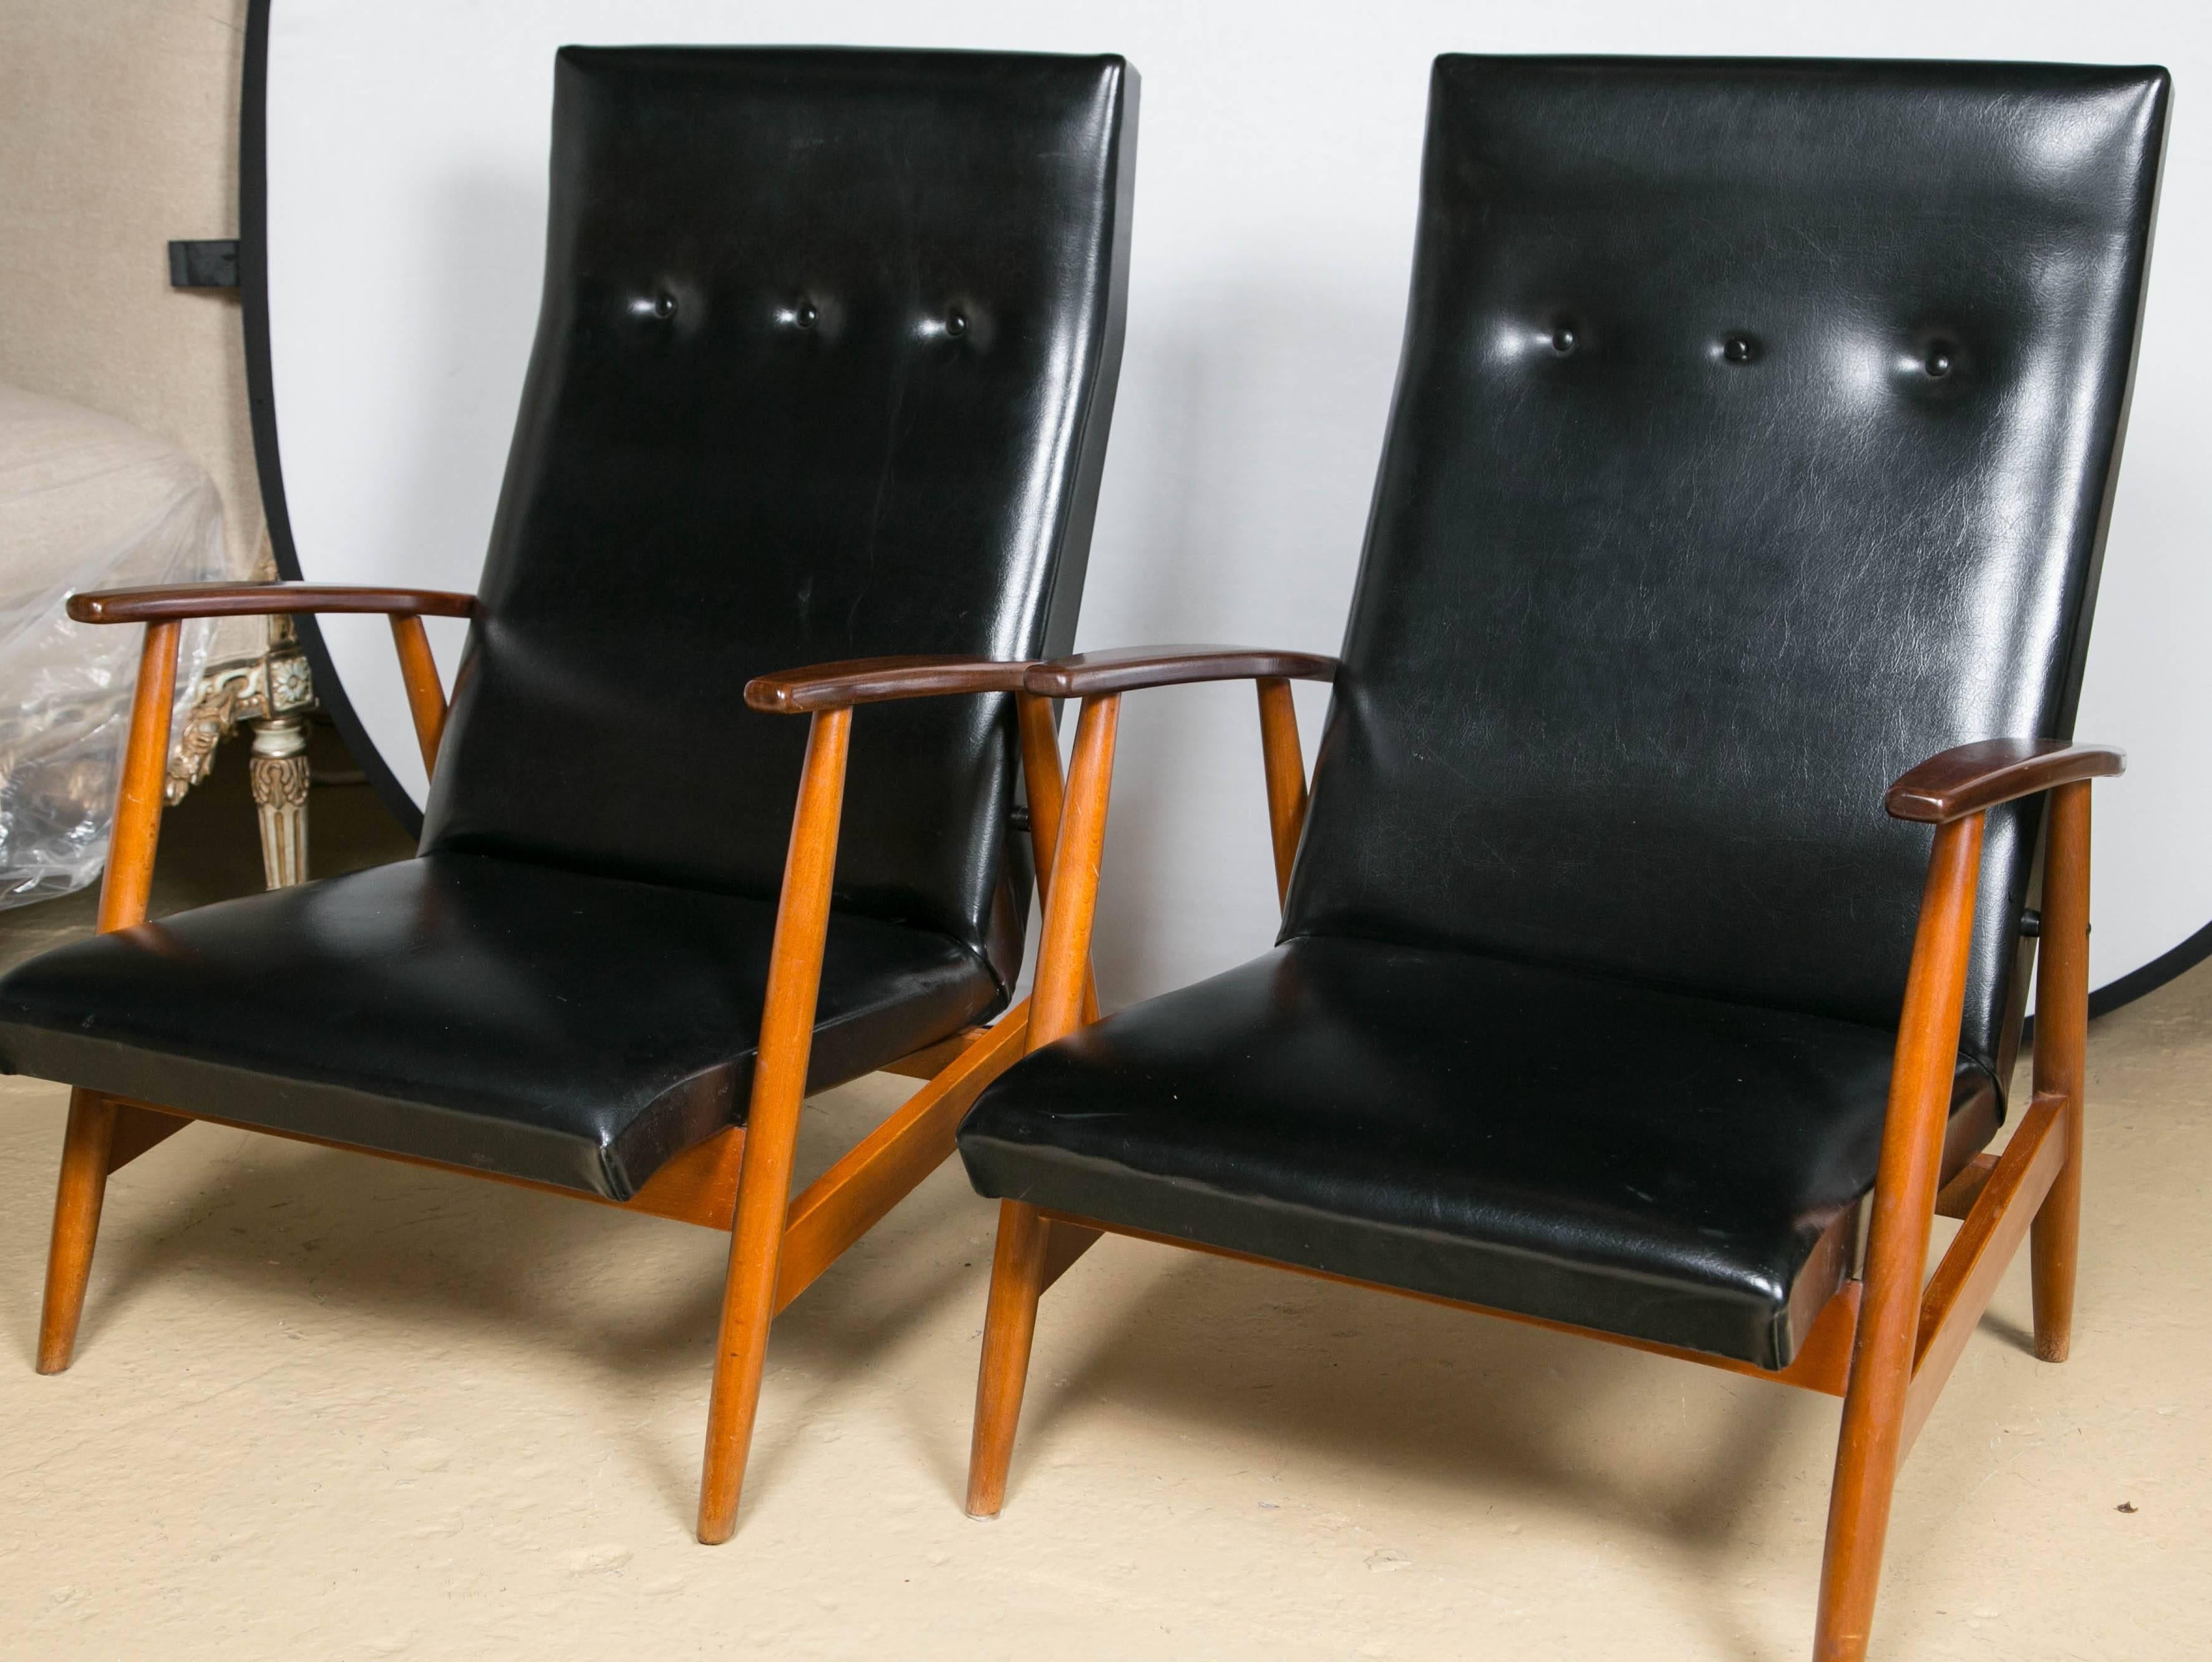 Pair of Scandinavian teak and black lounge chairs. Simplicity at its finest. This custom quality pair of lounge chairs has a wonderfully refined Mid-Century Modern look and design. The wood frames recently had rubbed French polished to a modest